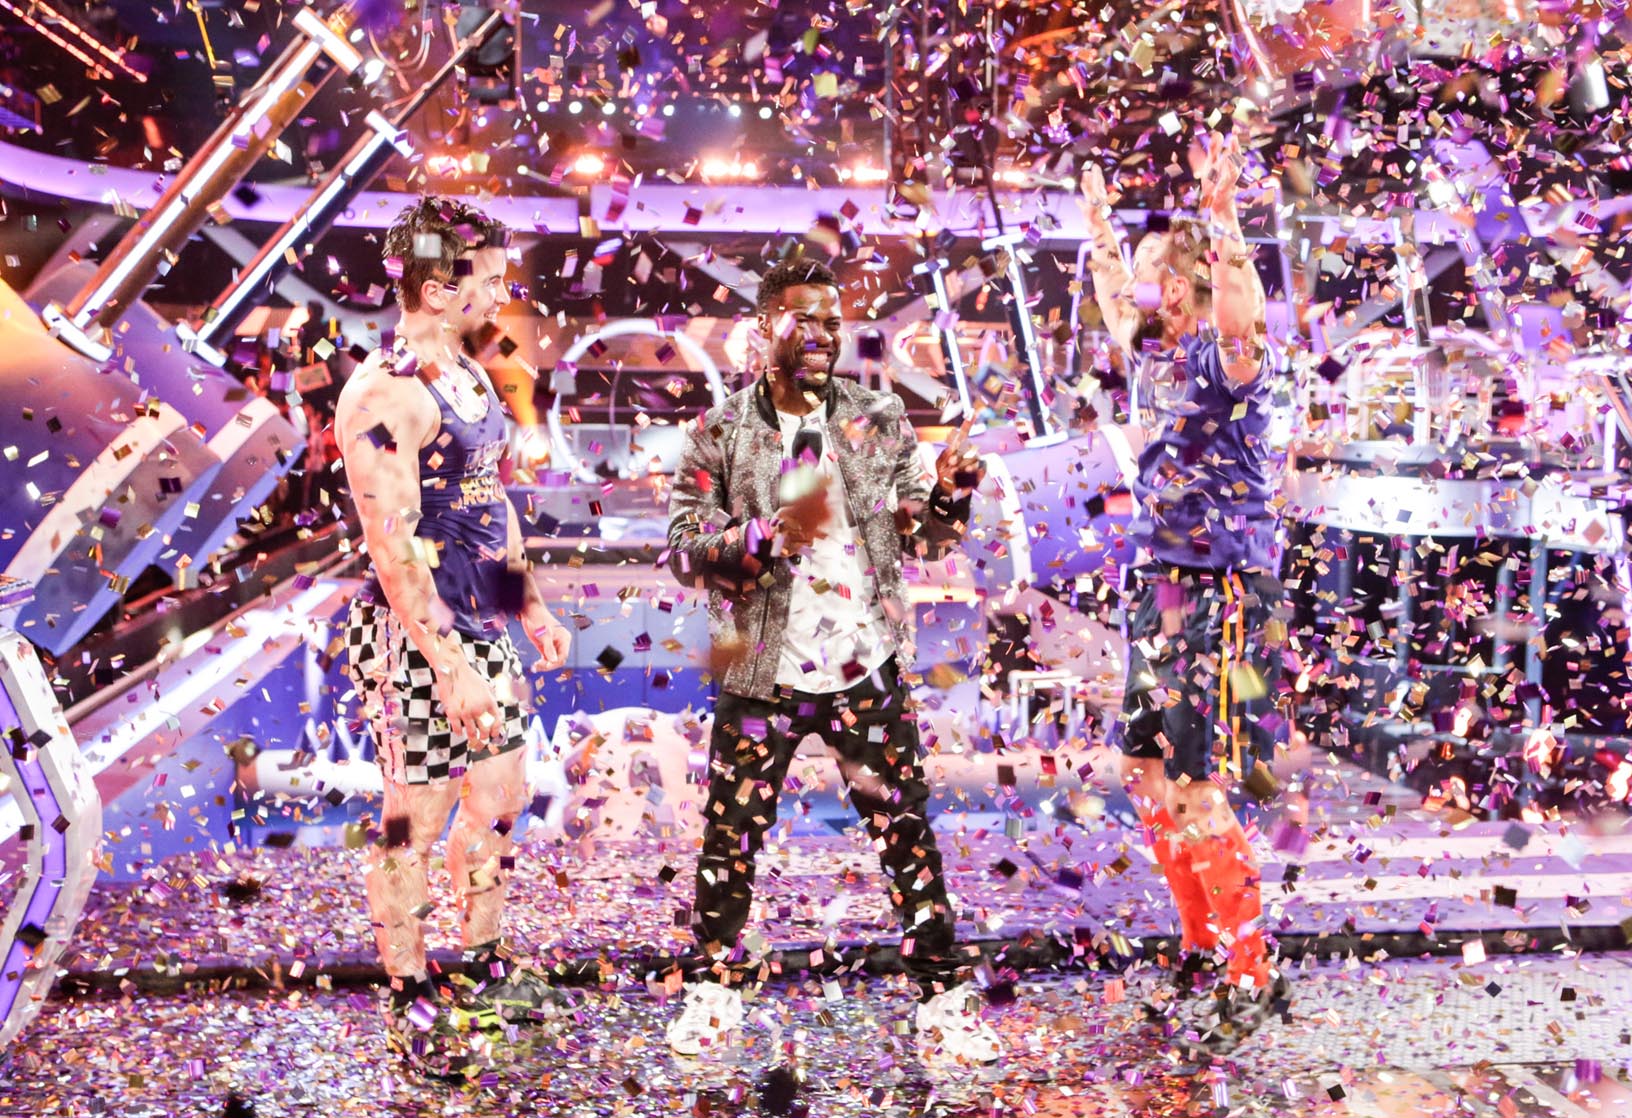 Bryce Abbey celebrates his win on the CBS show "TKO: Total Knock Out" with show host Kevin Hart. (Photo by Sonja Flemming, CBS ©2018 CBS Broadcasting)